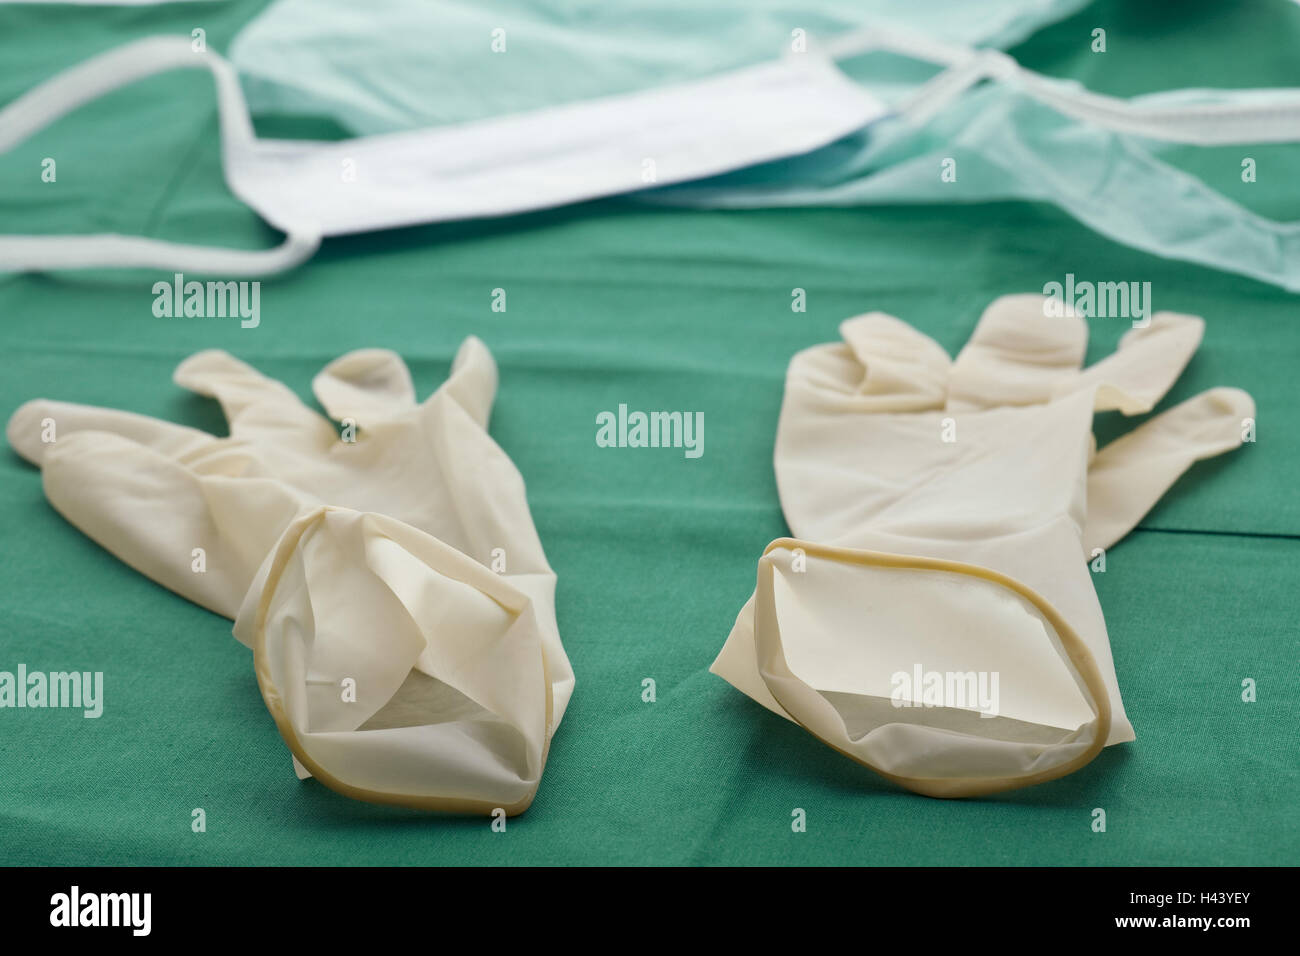 Op. cloth, mask, latex gloves, detail, Stock Photo